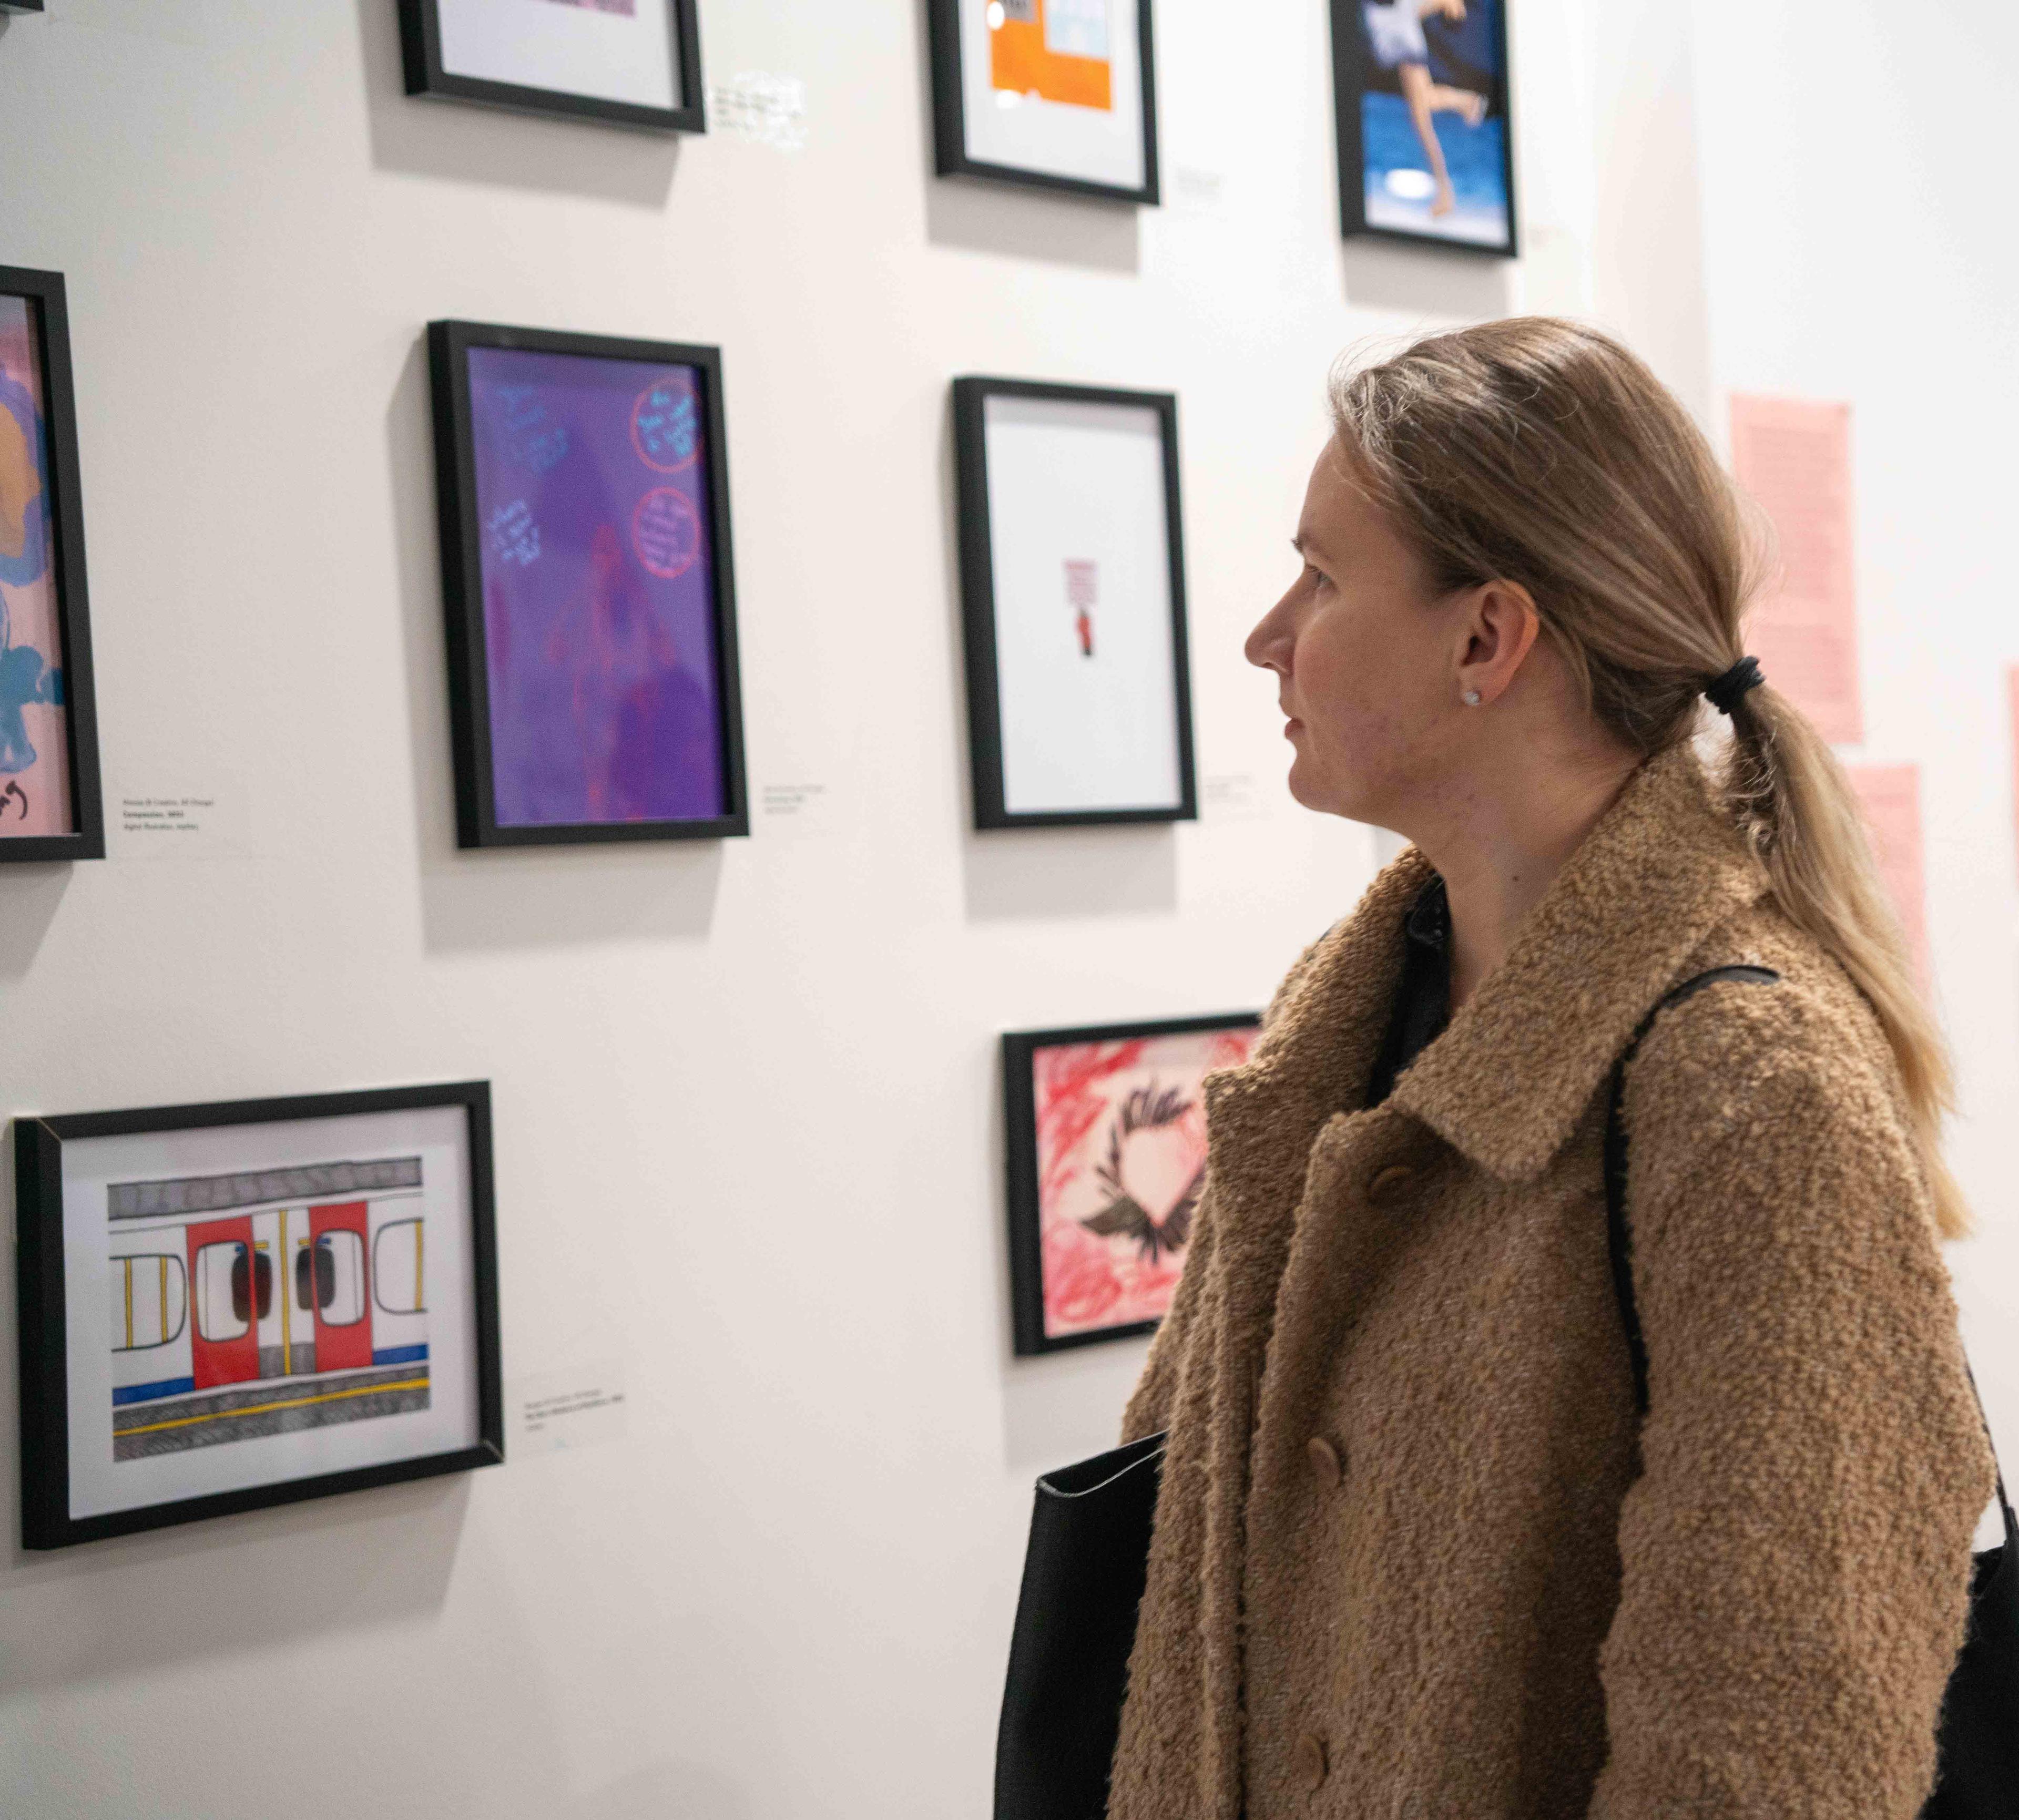 Person looking at framed illustrations on a wall.